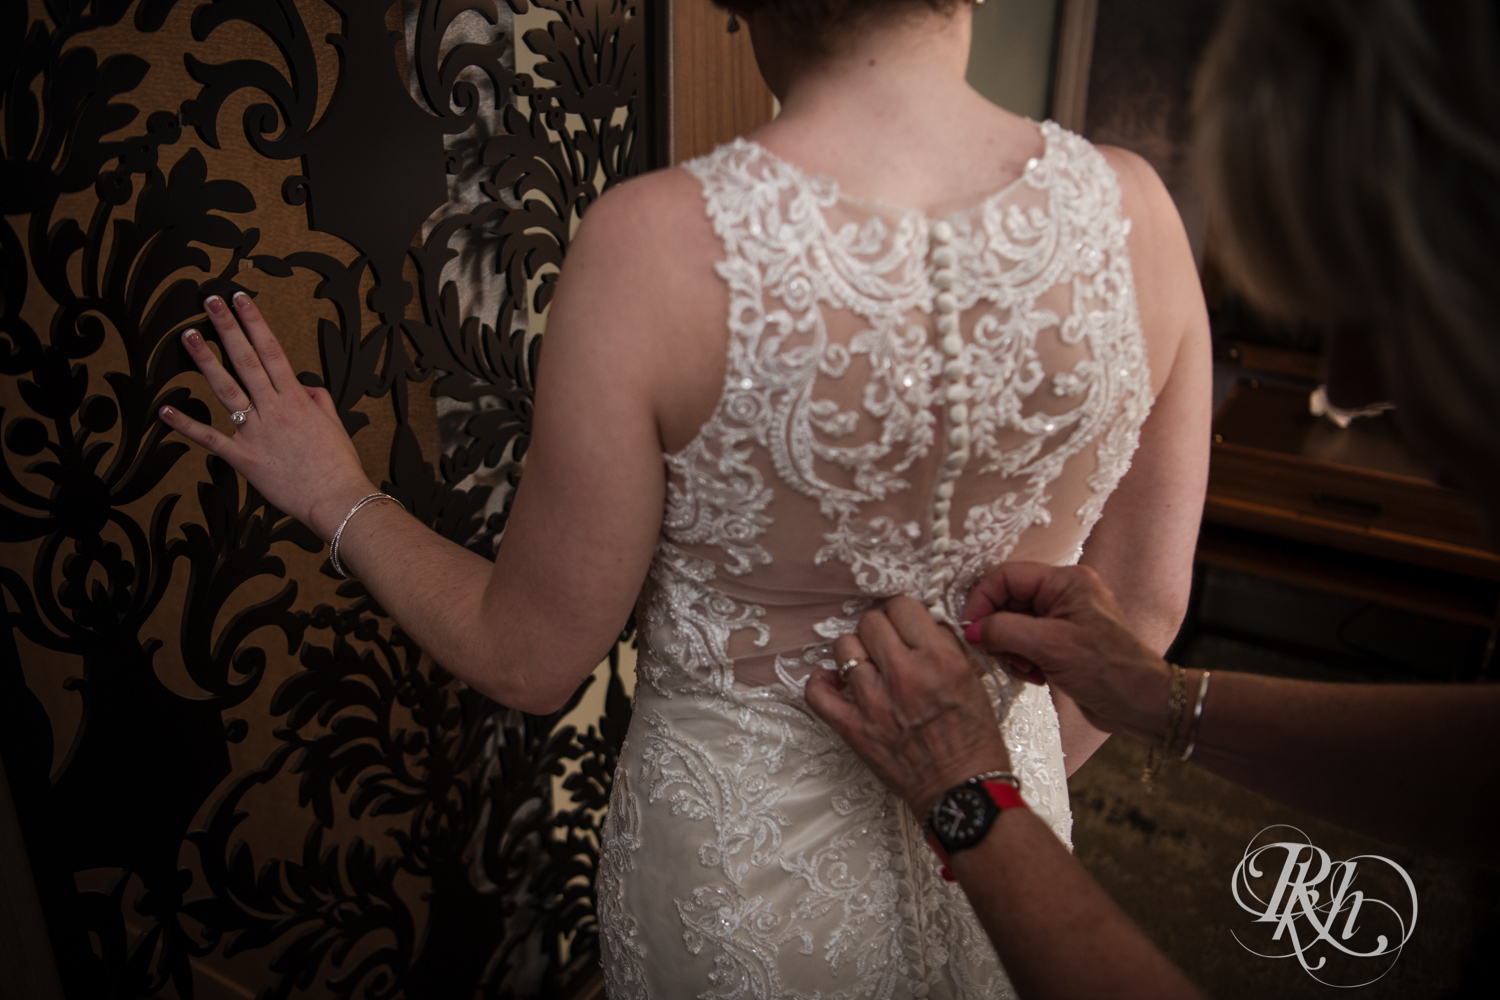 Bride getting buttoned into dress before wedding in Renaissance Hotel in Minneapolis, Minnesota. 